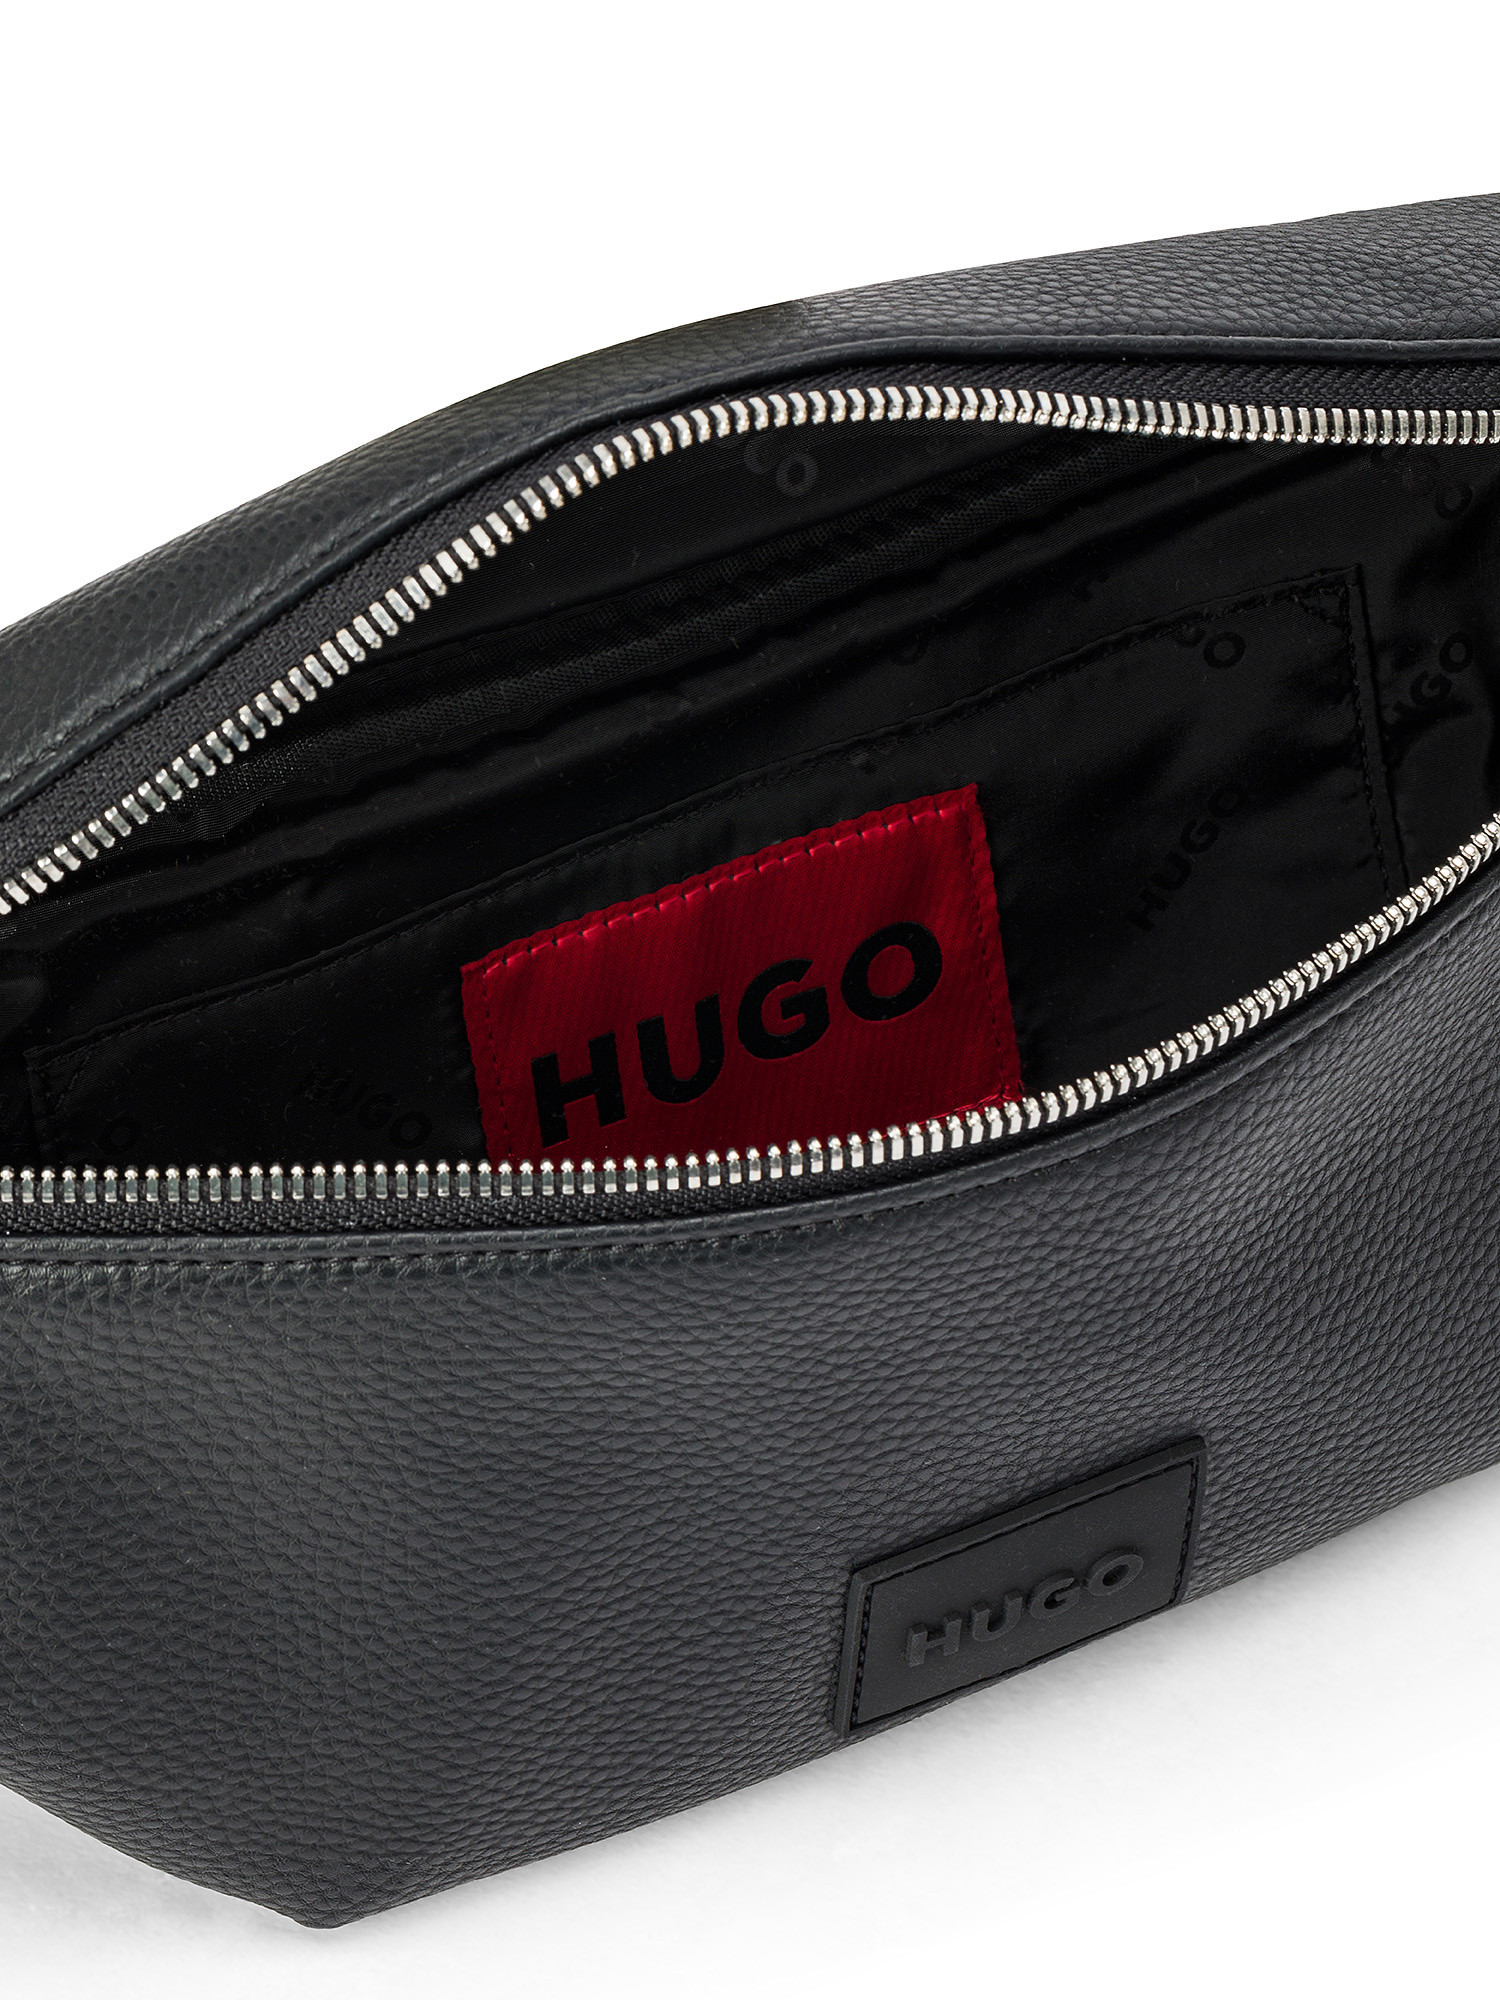 Hugo - faux leather pouch, Black, large image number 2